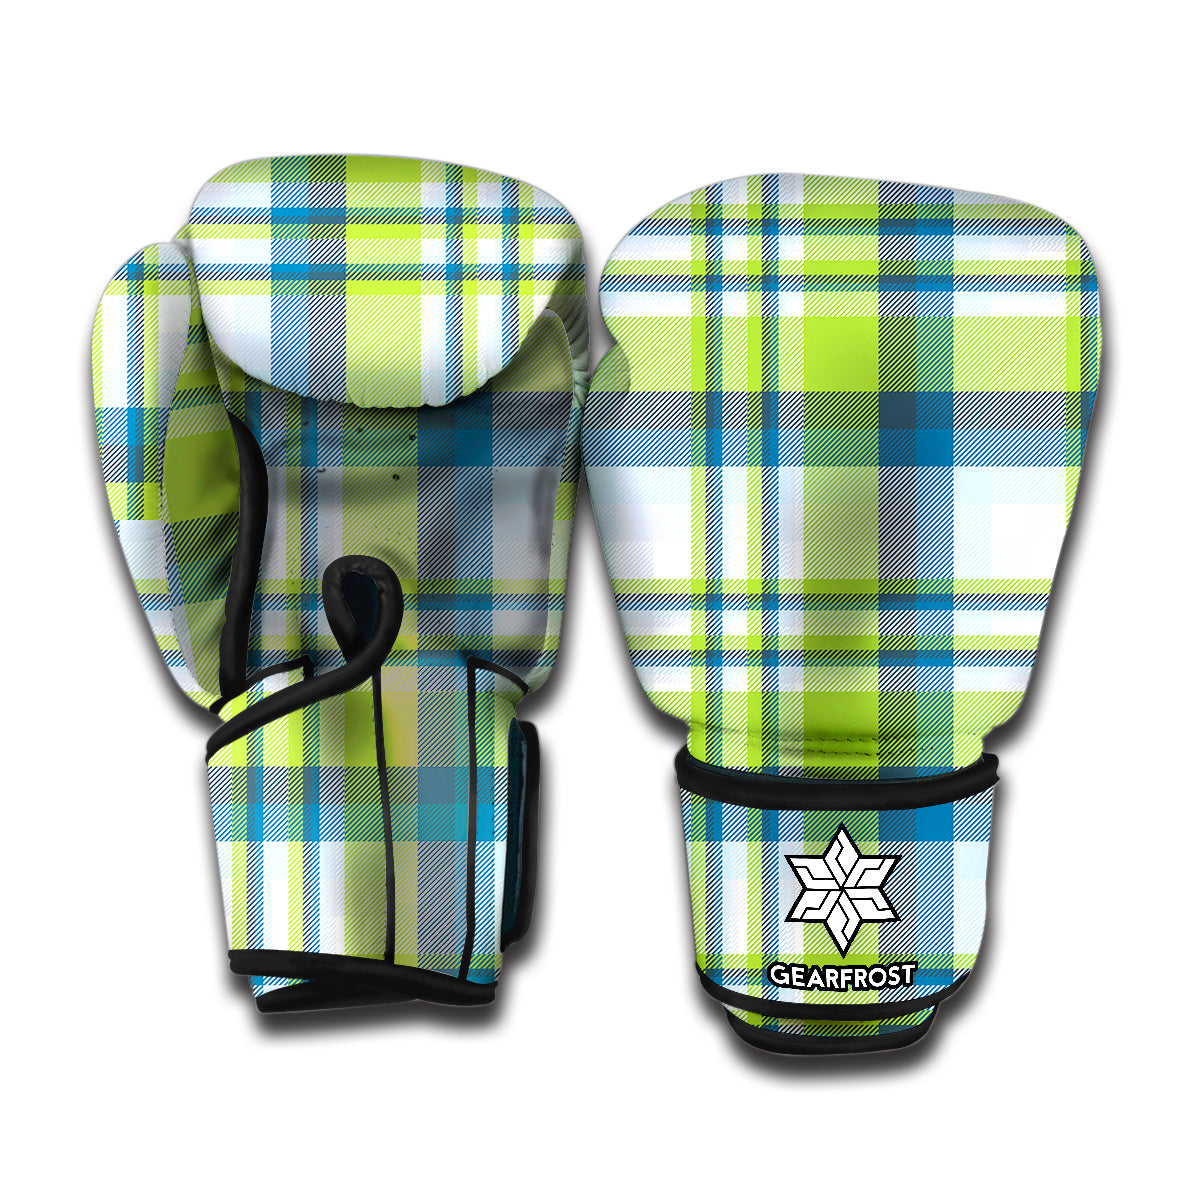 Lime And Blue Madras Plaid Print Boxing Gloves